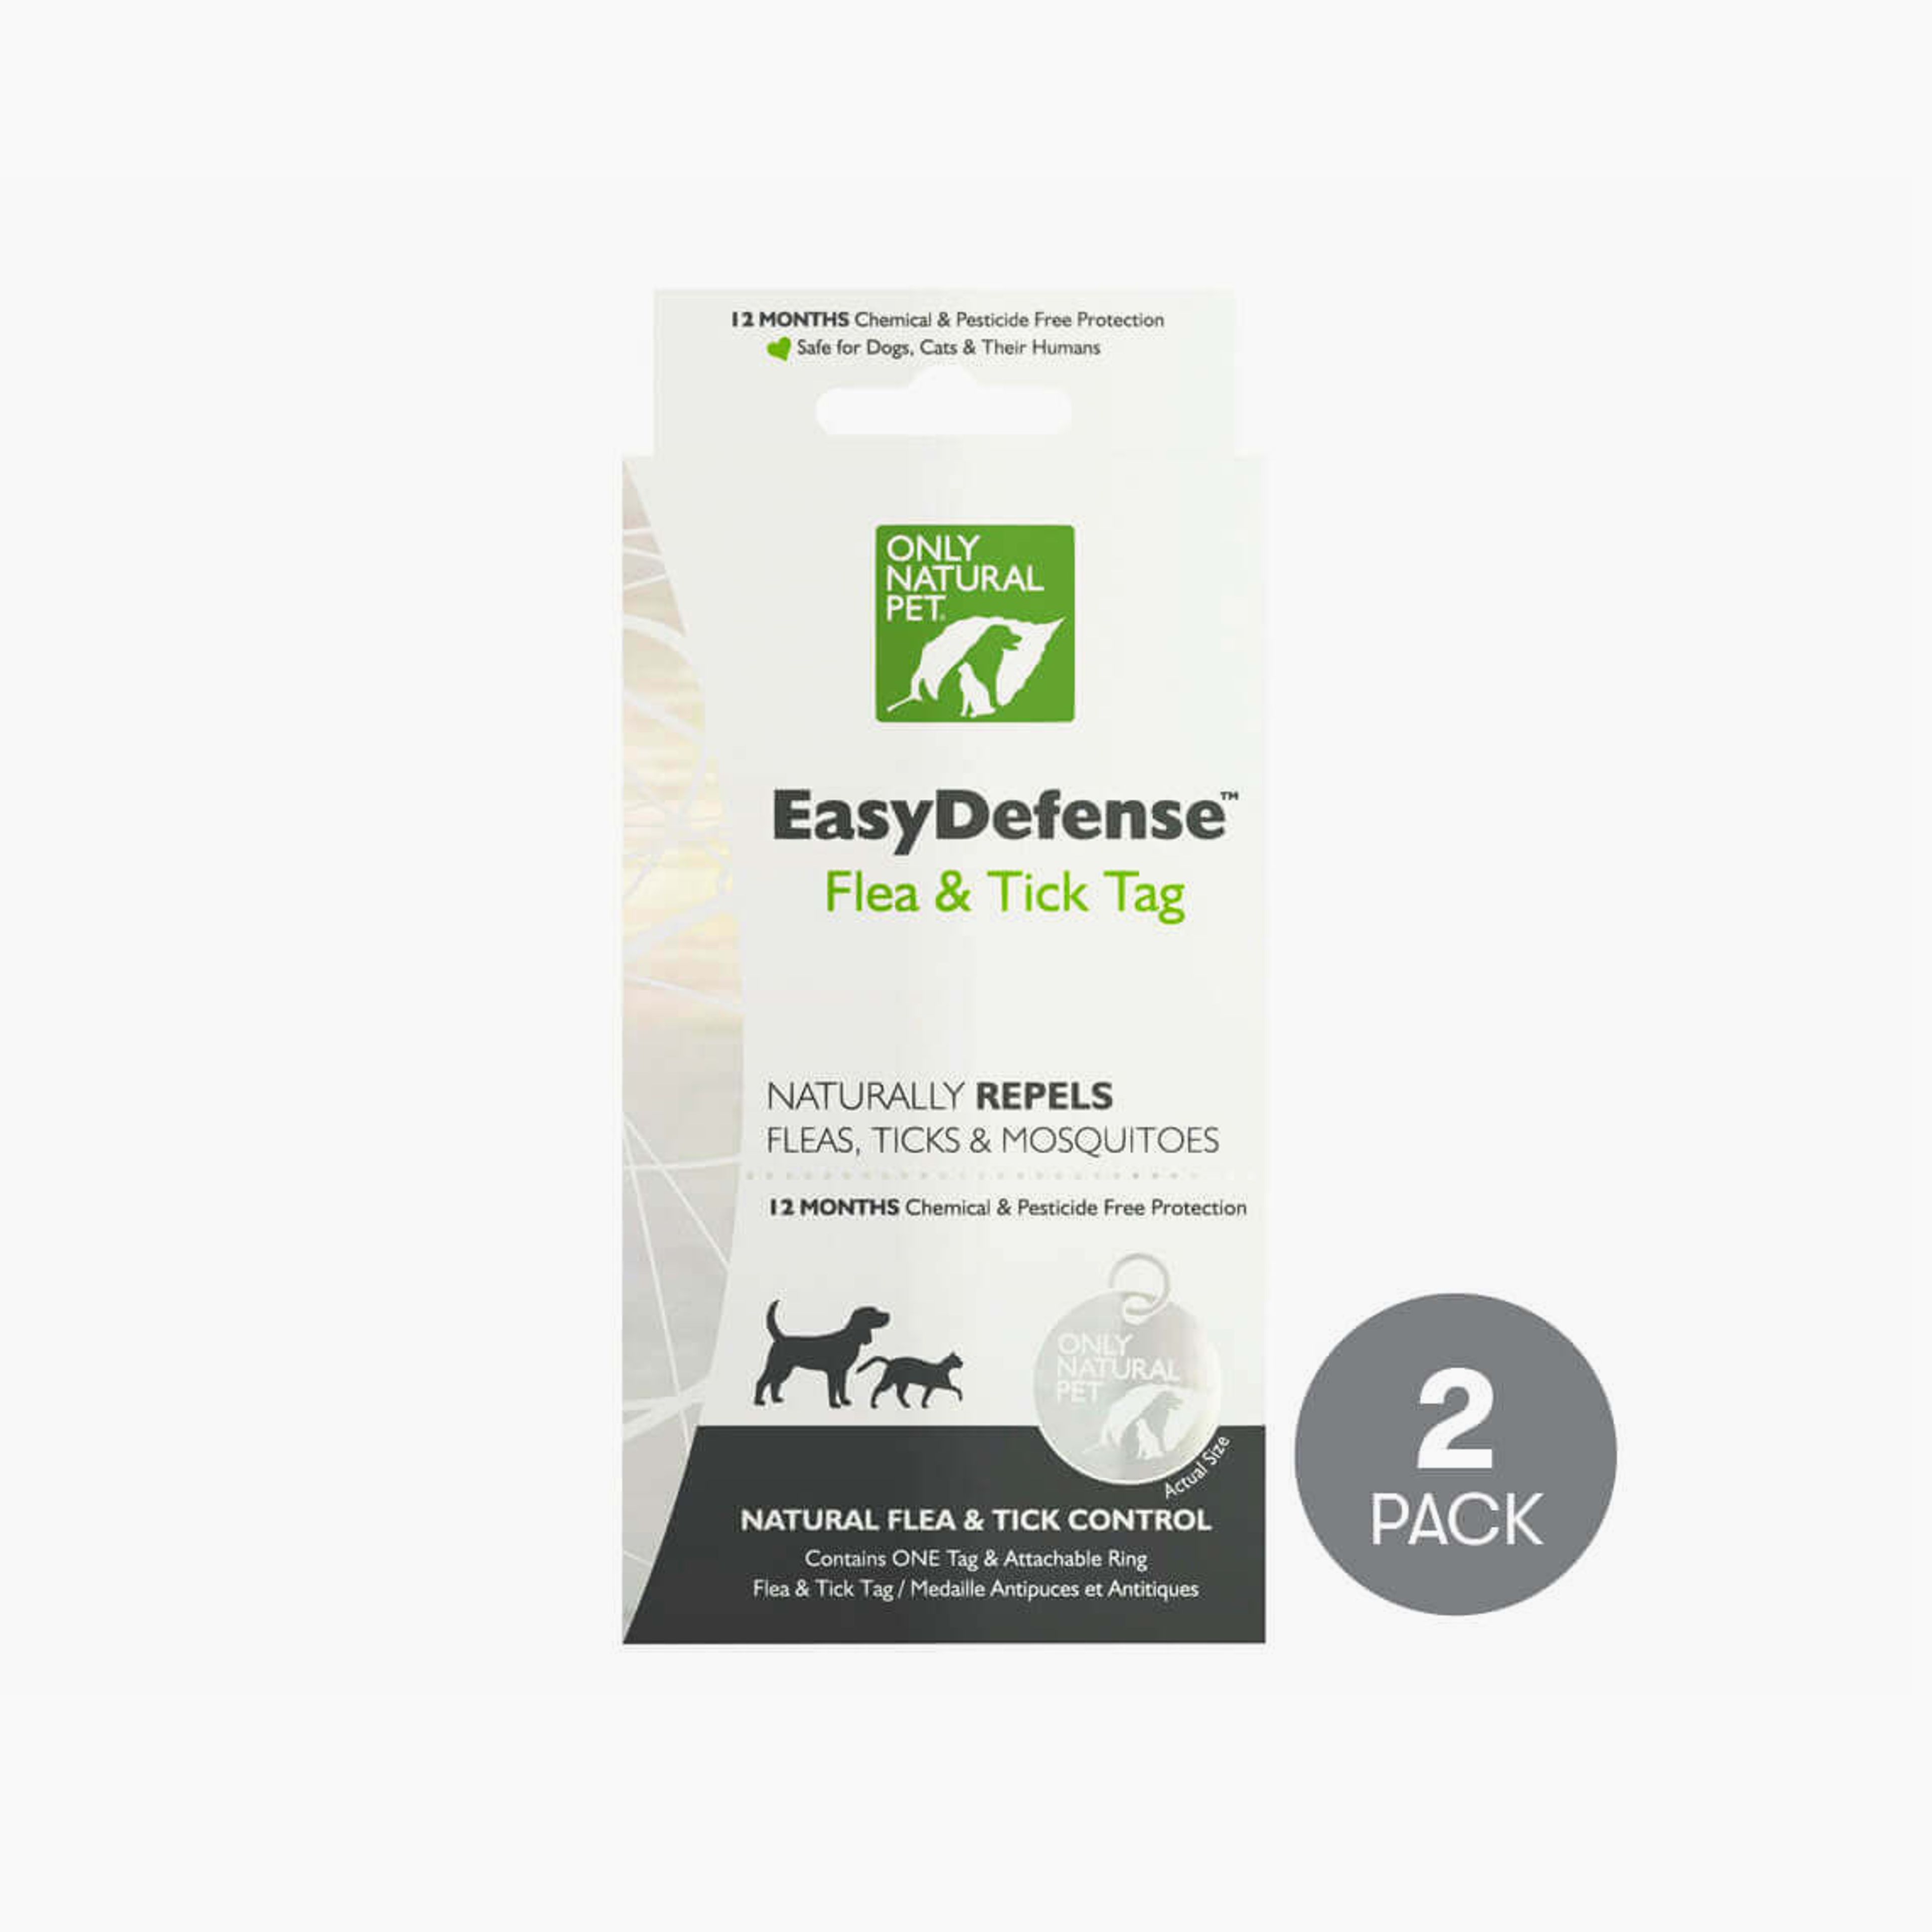 Only Natural Pet Easy Defense Flea & Tick Tag for Dogs & Cats